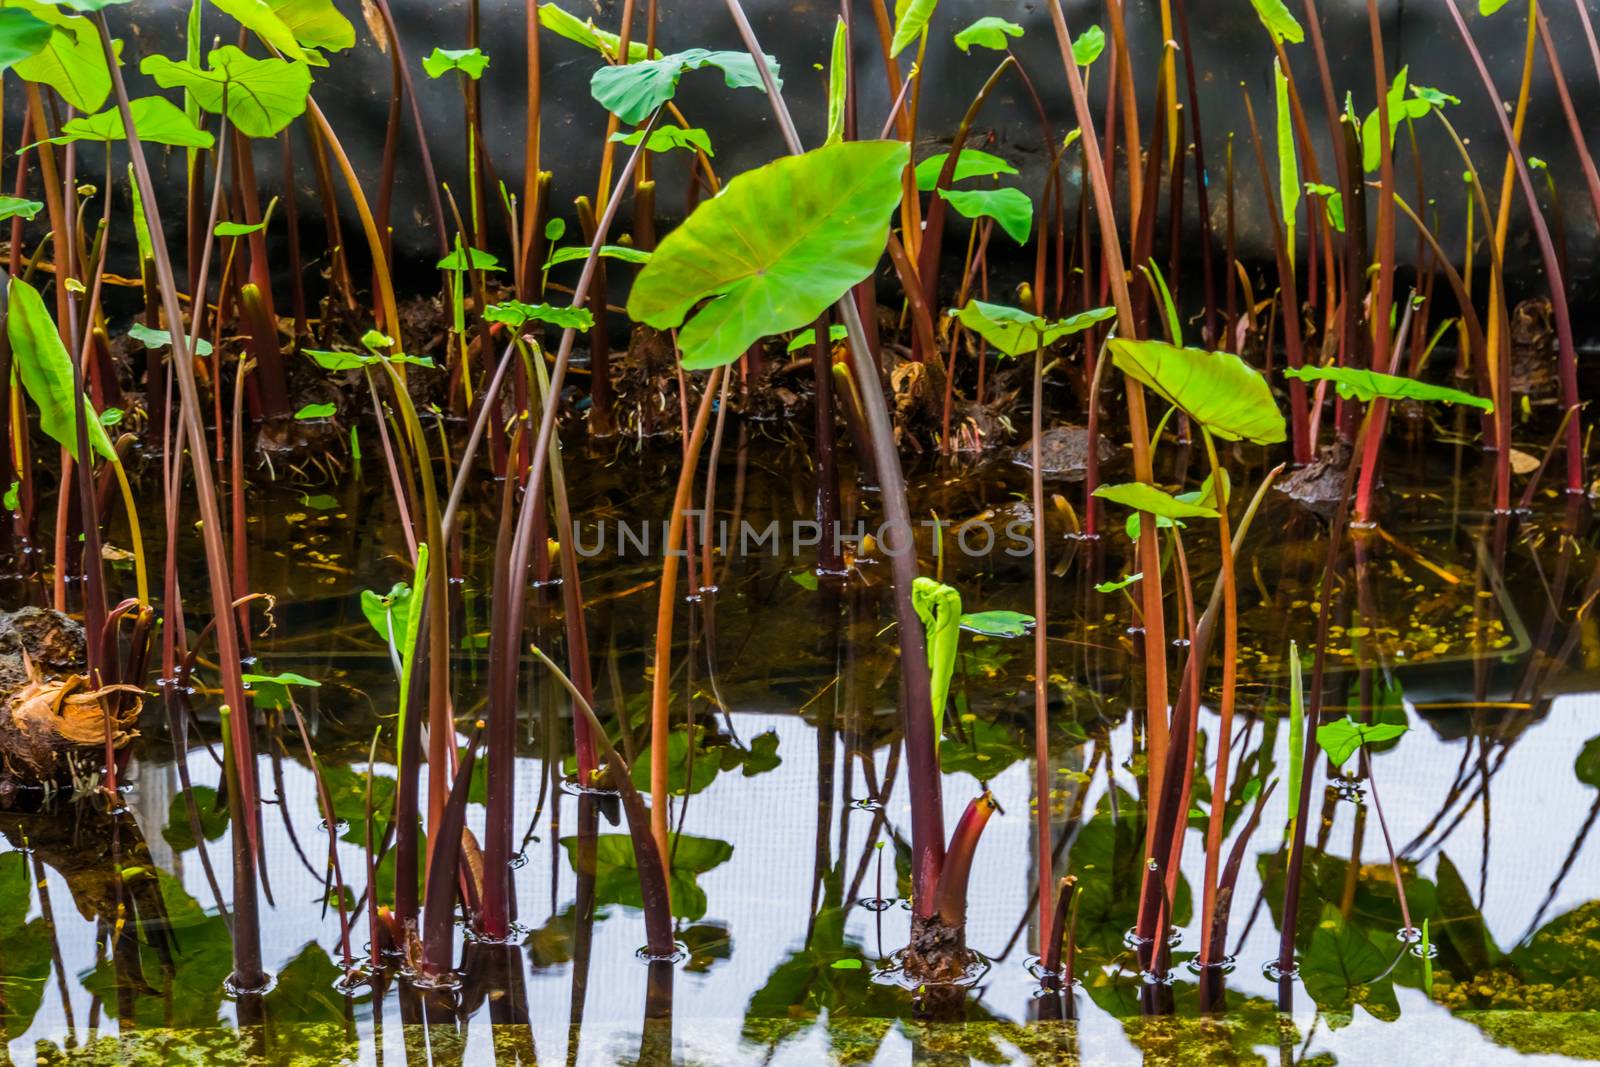 group of Taro plants in the water, Cultivation of tropical plants and vegetables, agriculture background by charlottebleijenberg